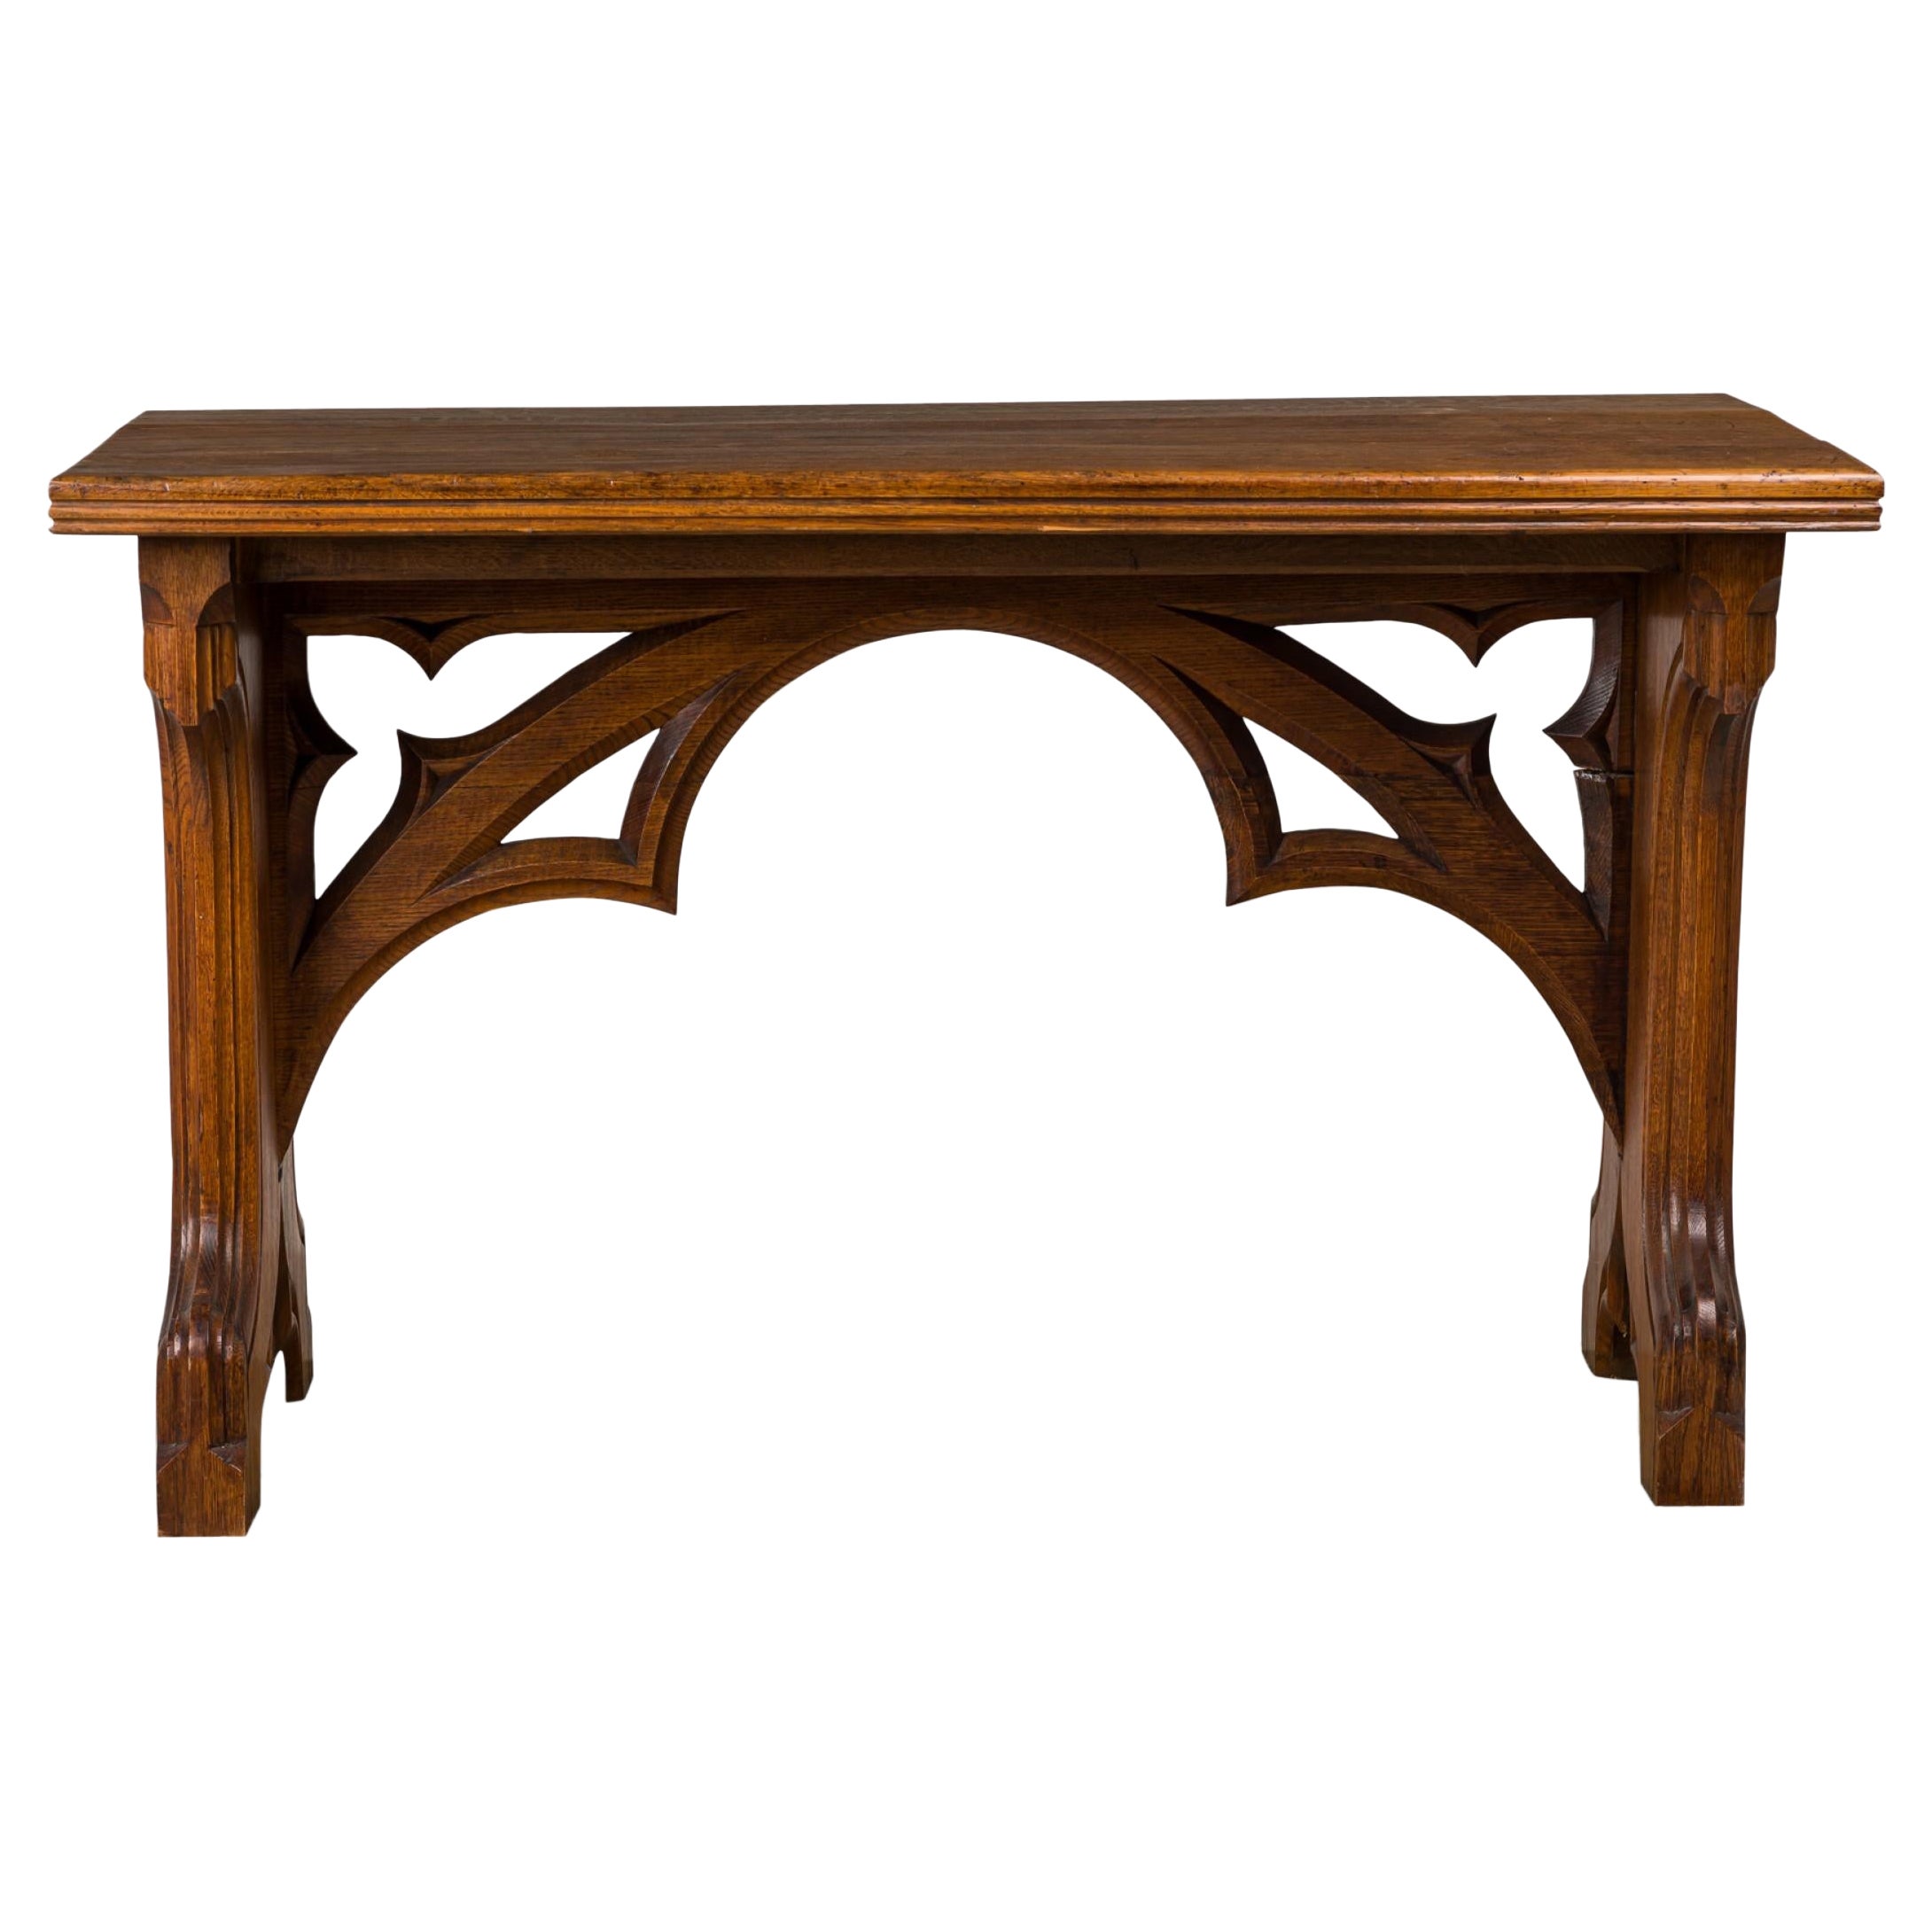 English Victorian Gothic Revival Carved Oak Table